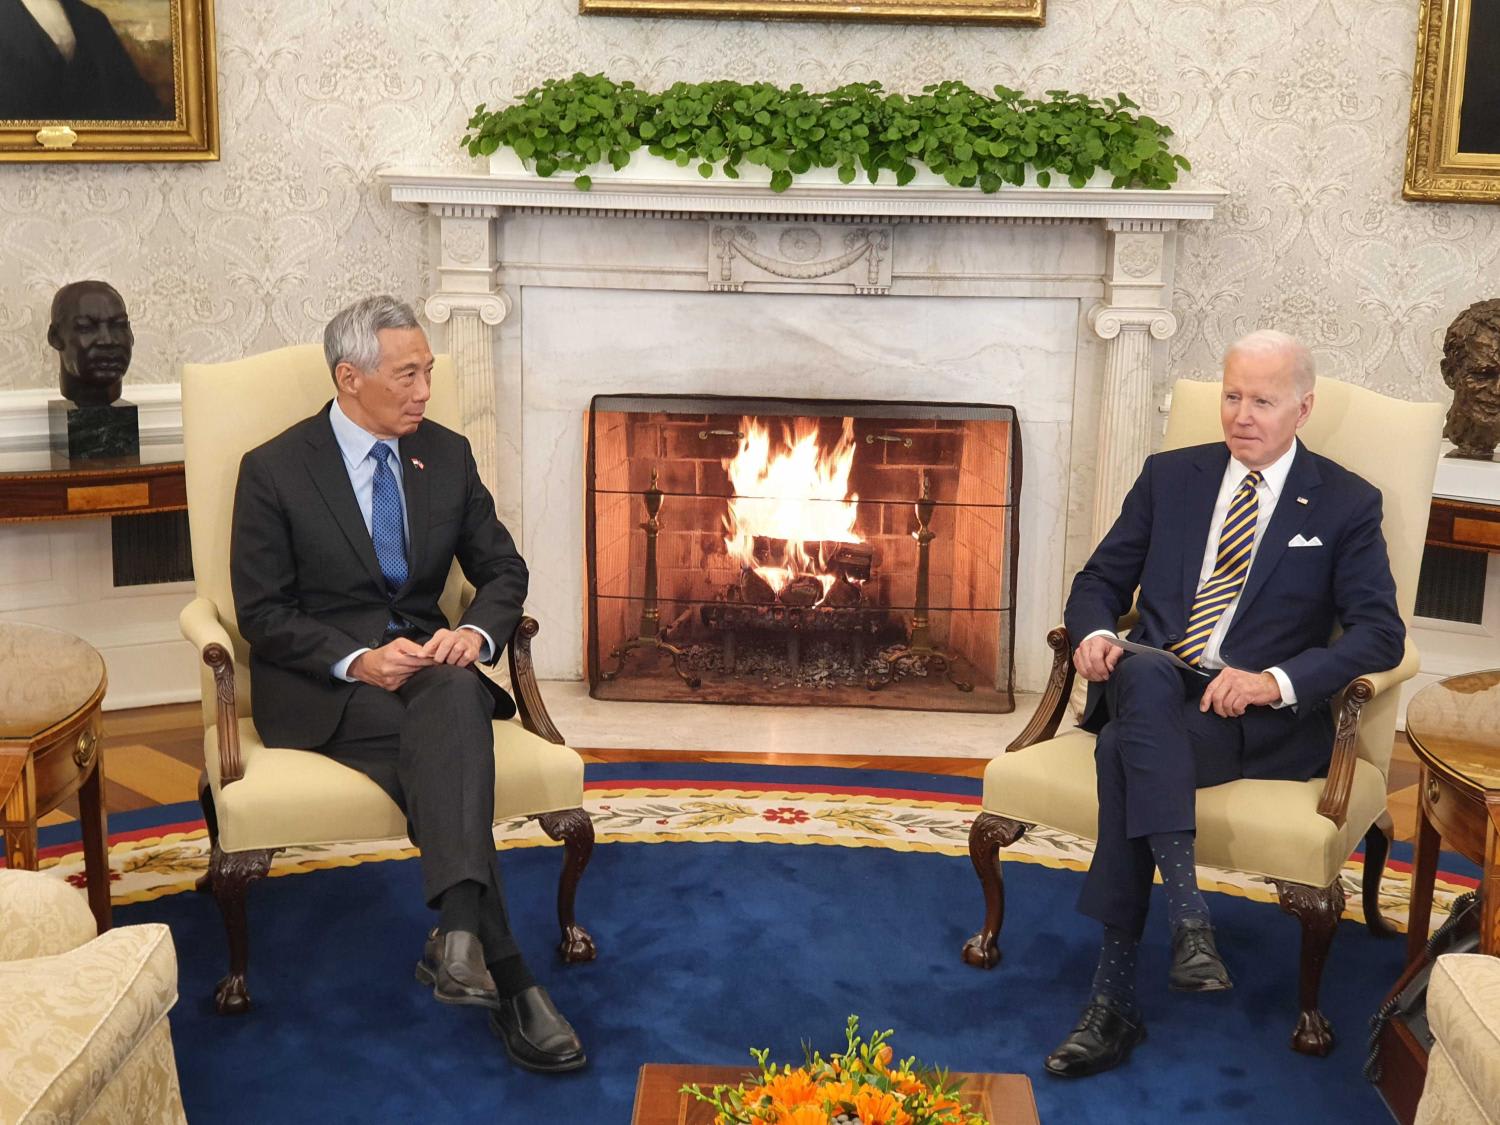 Prime Minister Lee Hsien Loong (left) meets US President Joe Biden (right) in the Oval Office at the White House in Washington, US on March 29, 2022. 